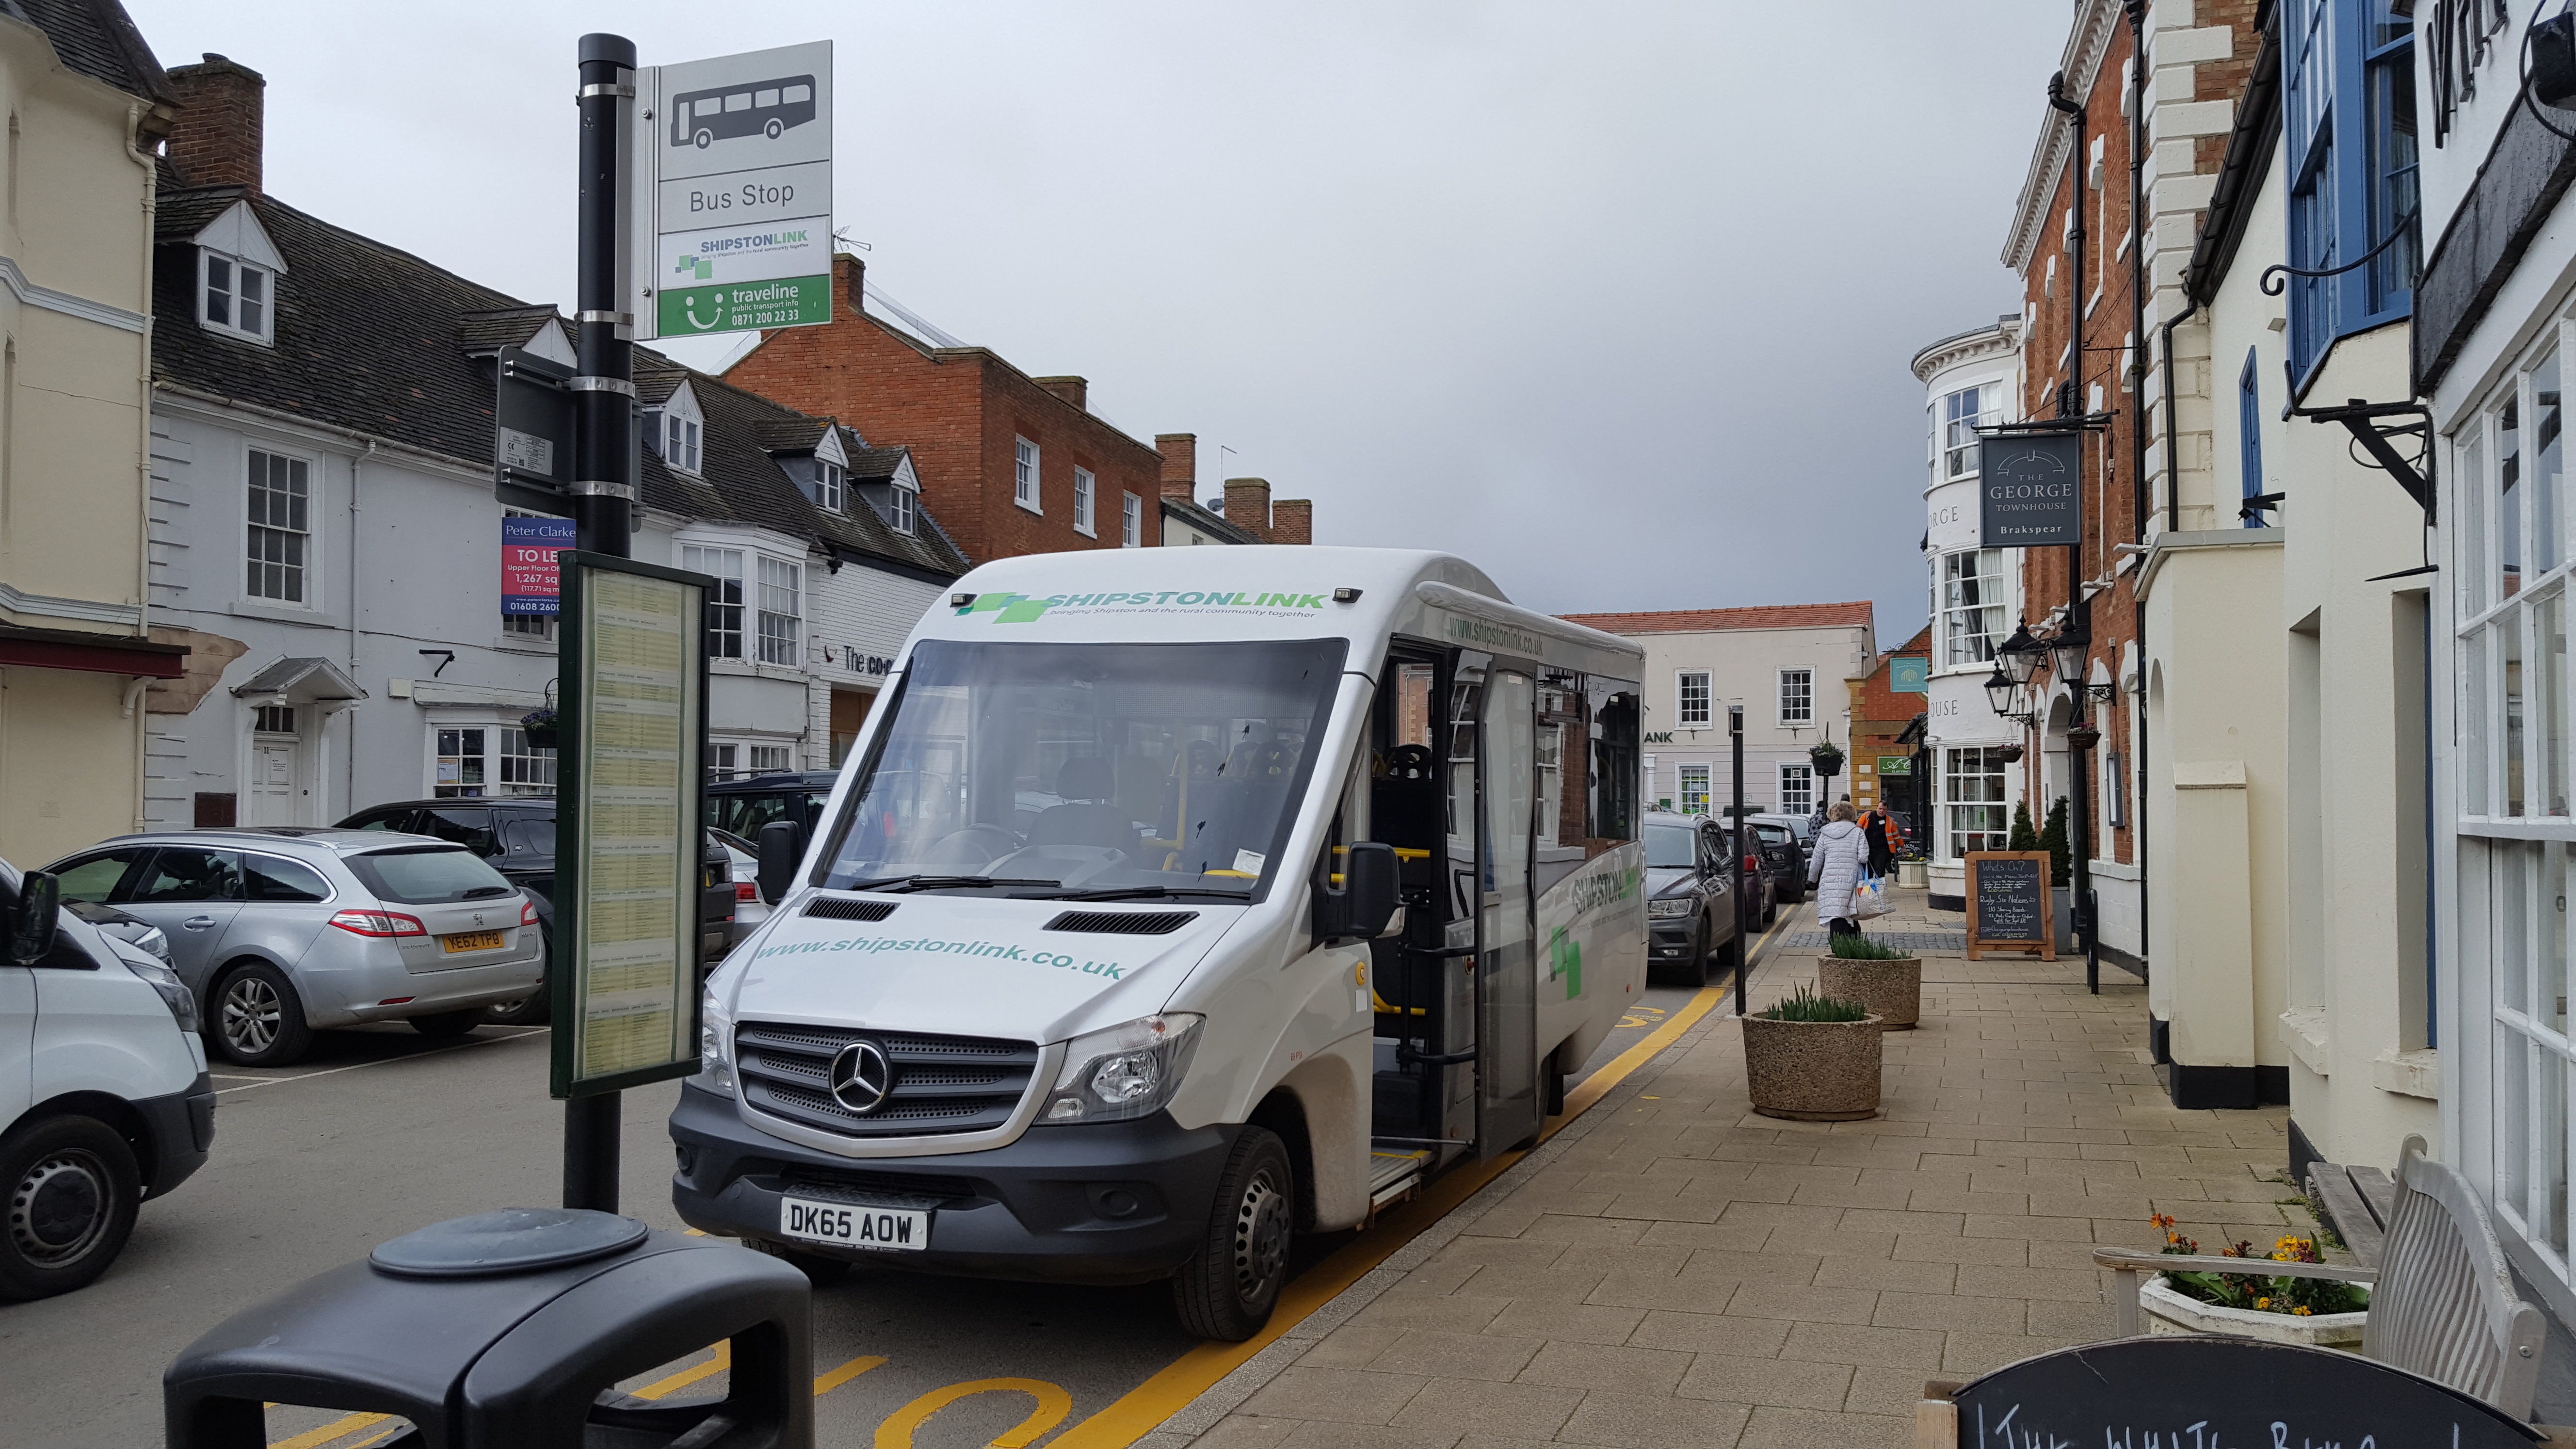 The Shipston Link bus service waits at the refurbished stop in Shipston Square